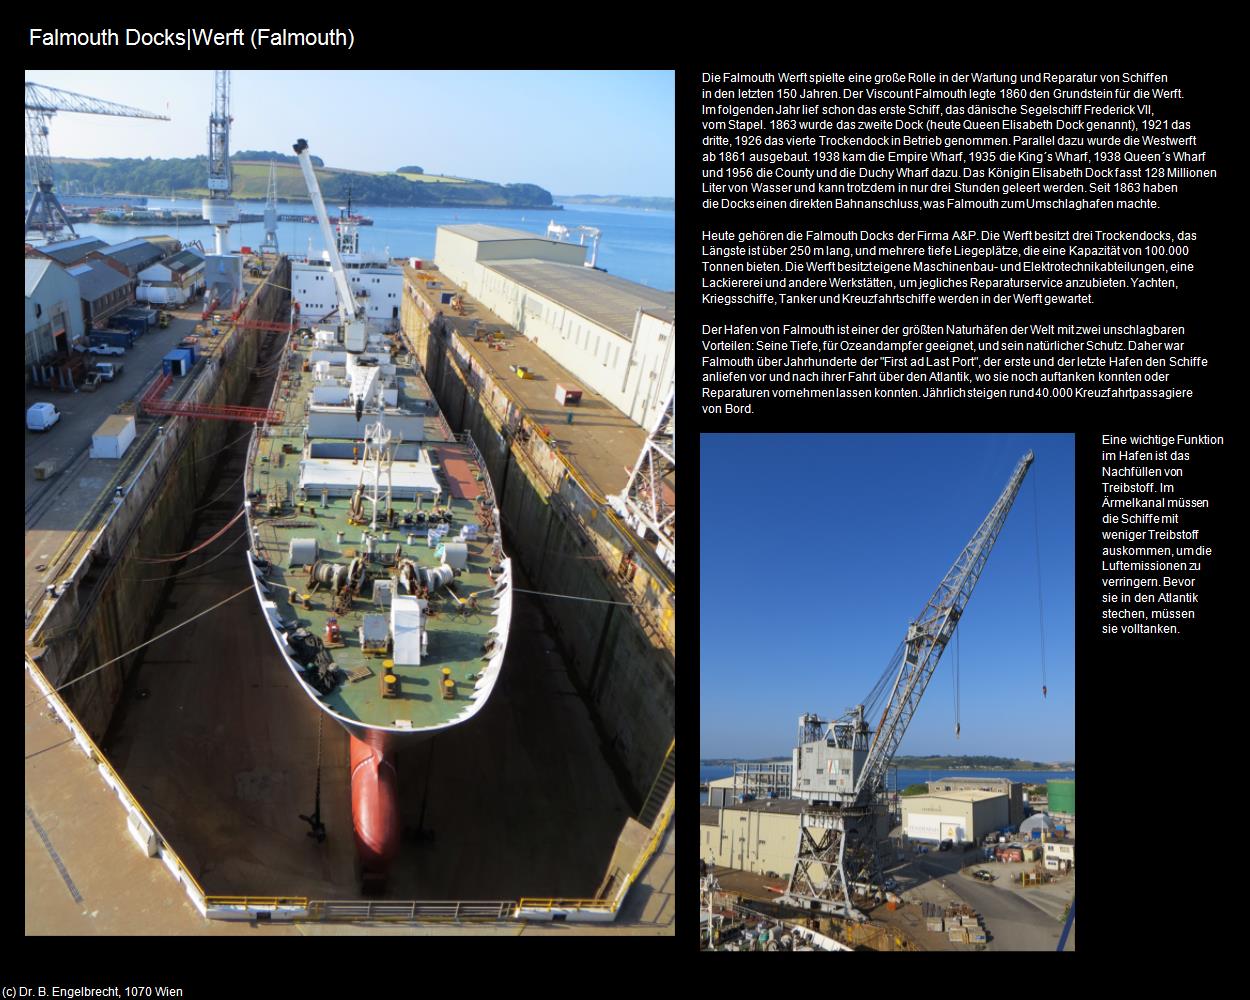 Falmouth Docks (Falmouth, England) in Kulturatlas-ENGLAND und WALES